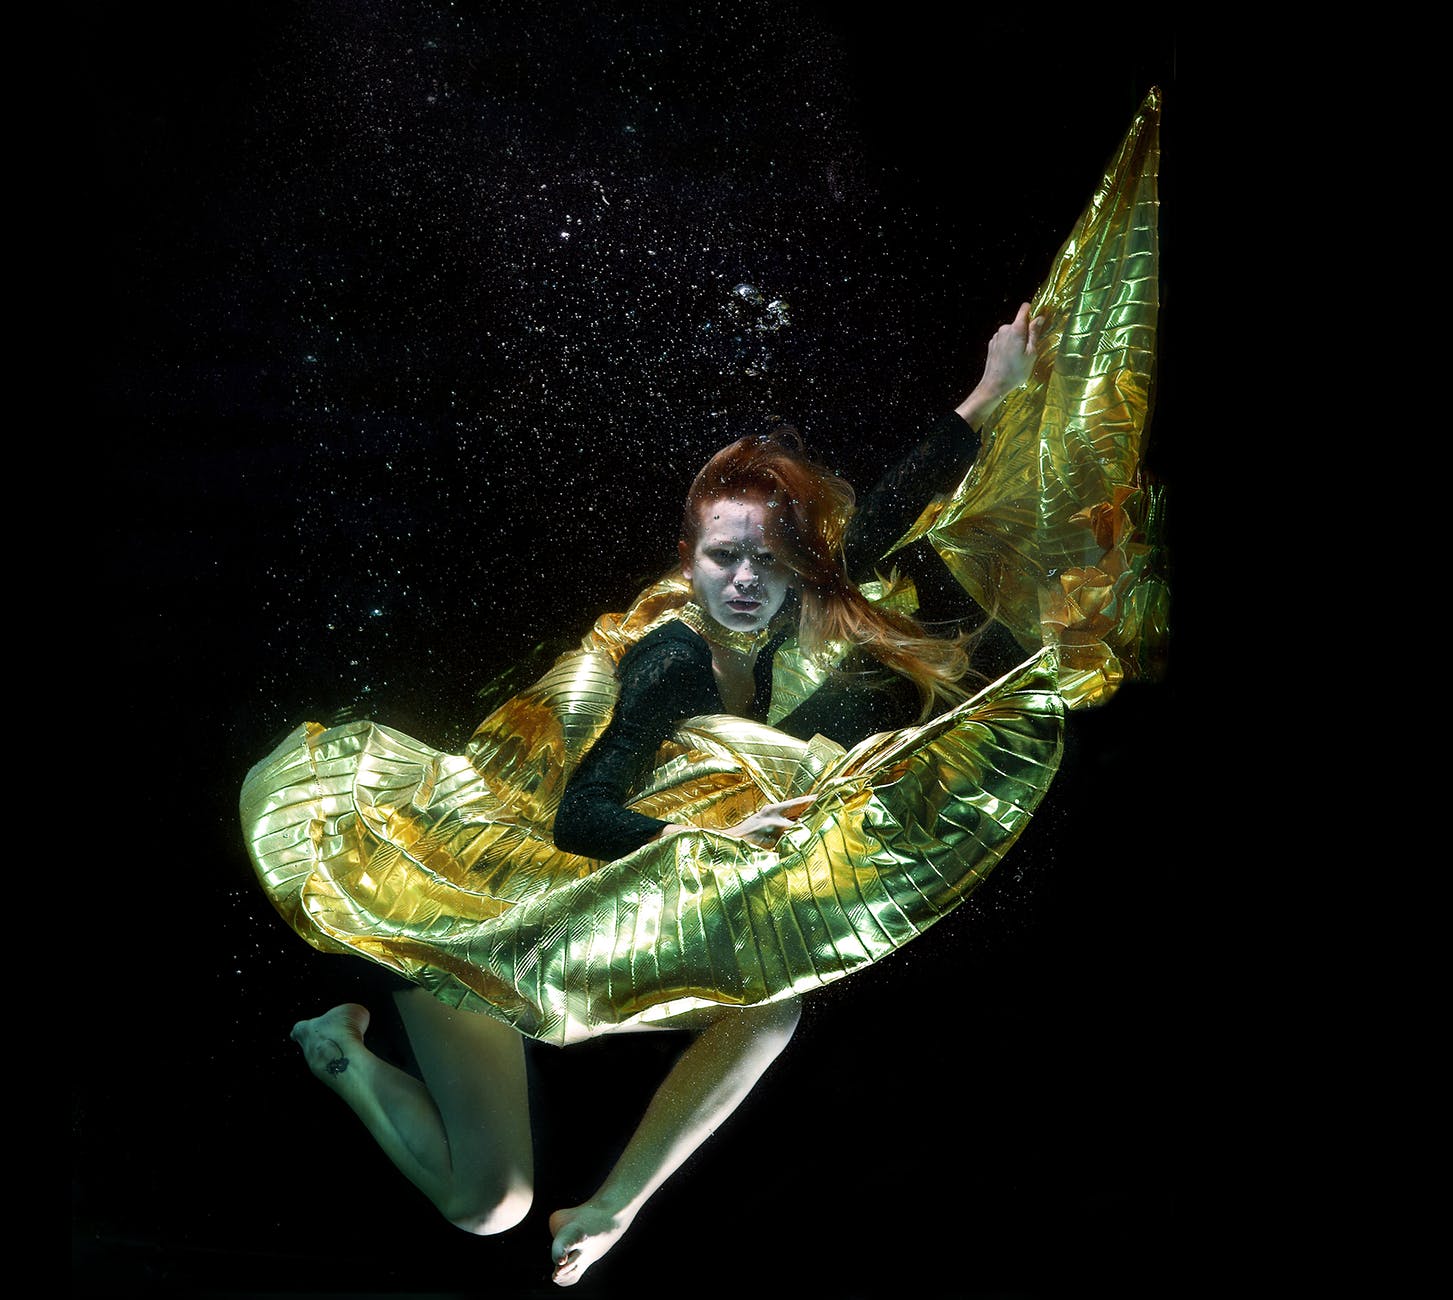 underwater photo of woman wearing green and black dress